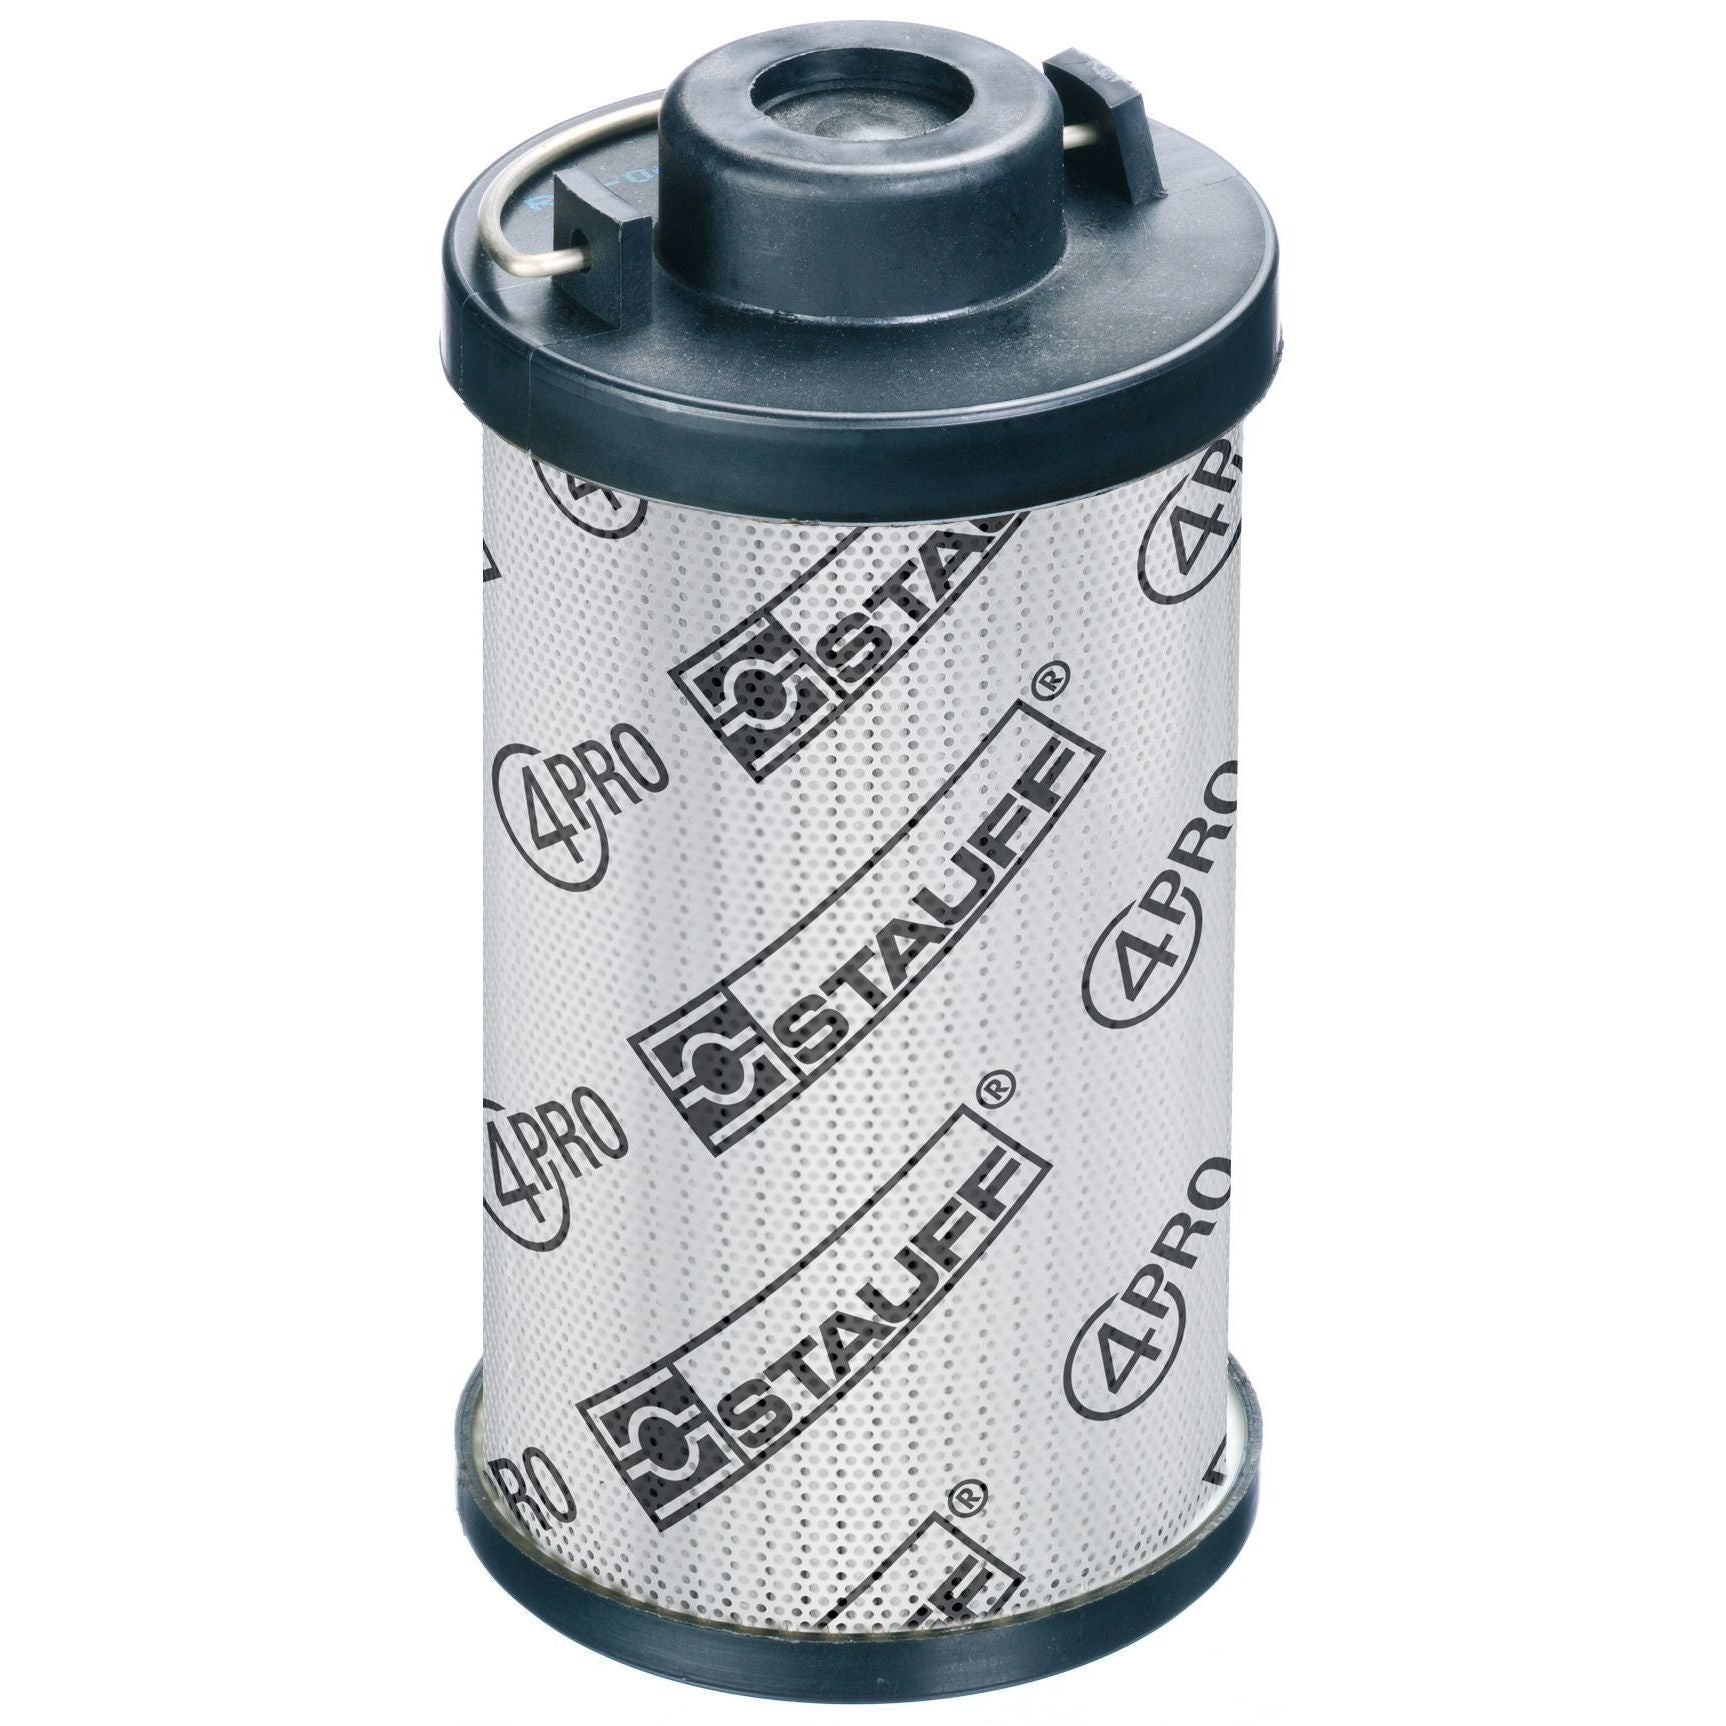 RE-030-A-20-B/3 : Stauff RF-030 Series Filter Element, 20 Micron, Stainless Fiber Media, 435psi Collapse Differential, Buna